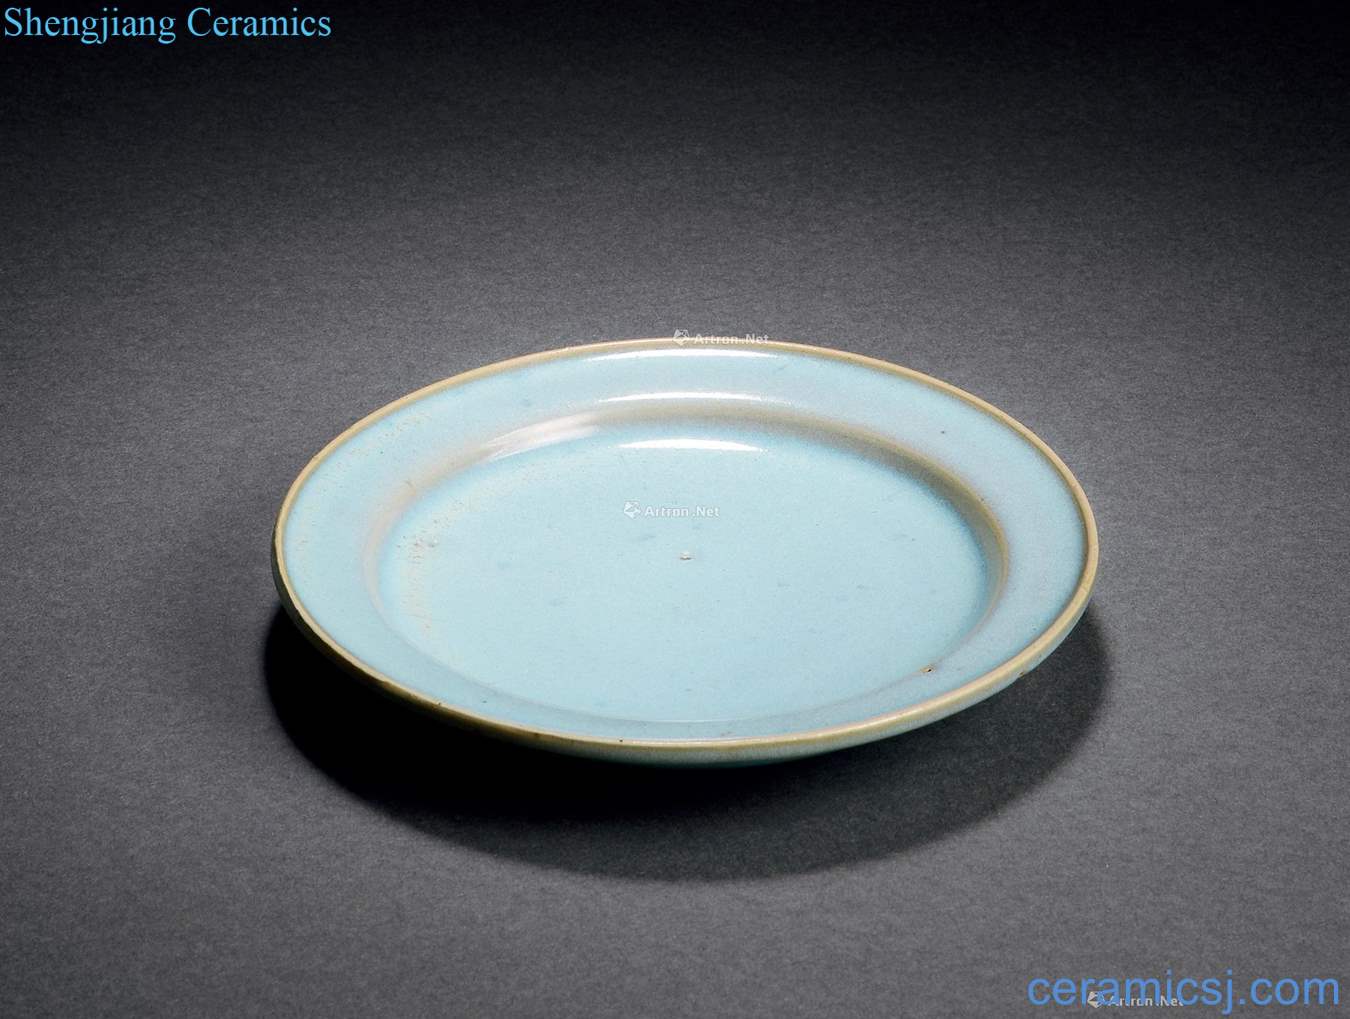 Northern song dynasty Sky blue glaze masterpieces fold along the plate